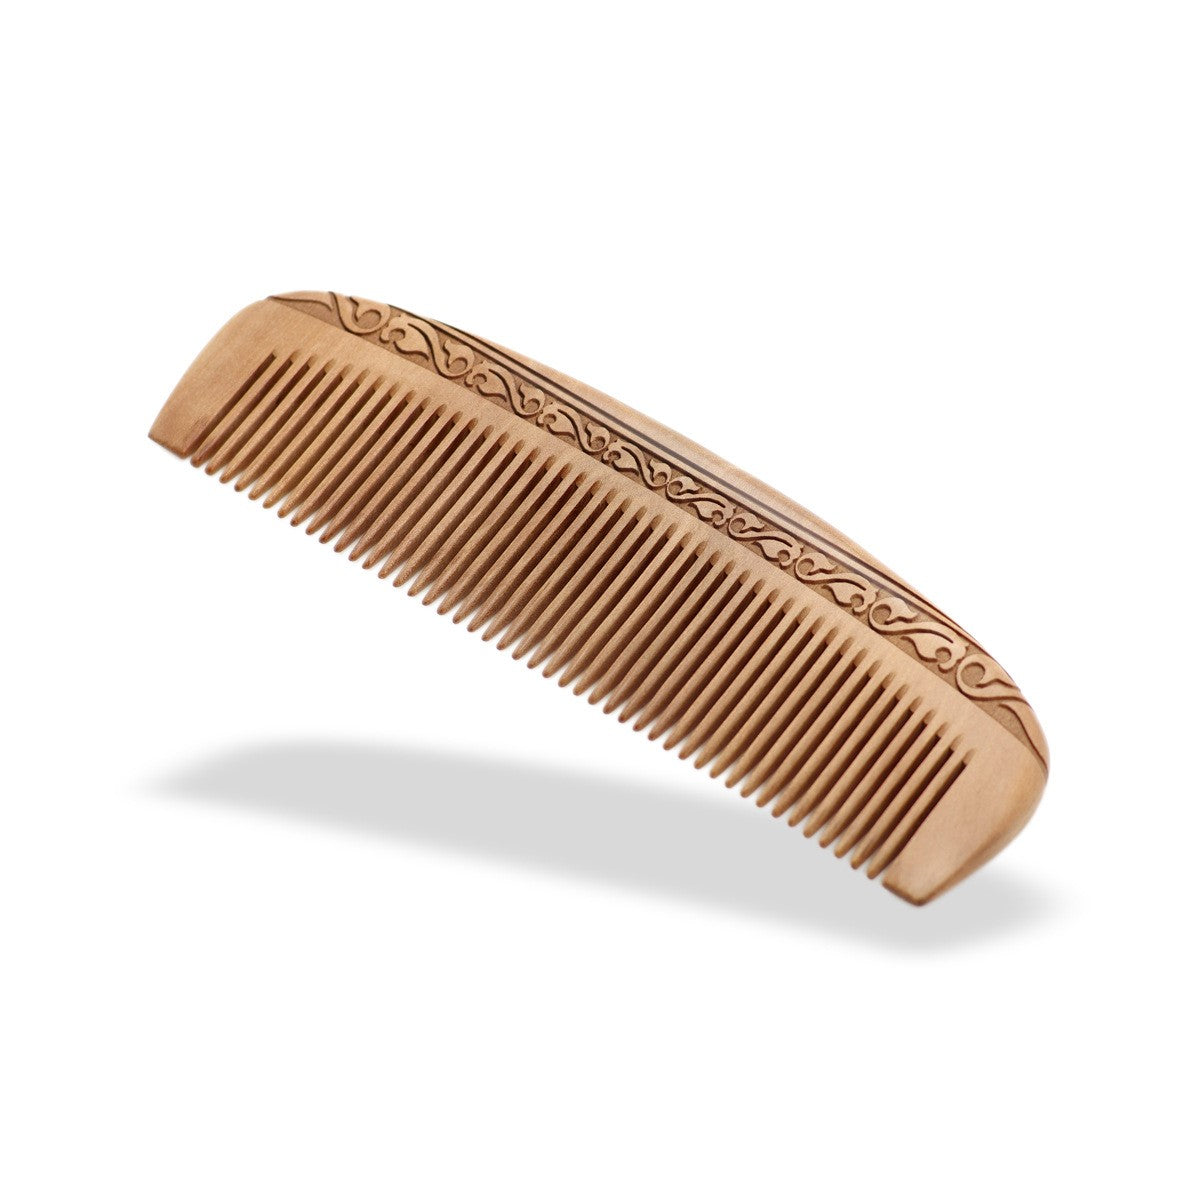 Carving Series Peach Wood Comb